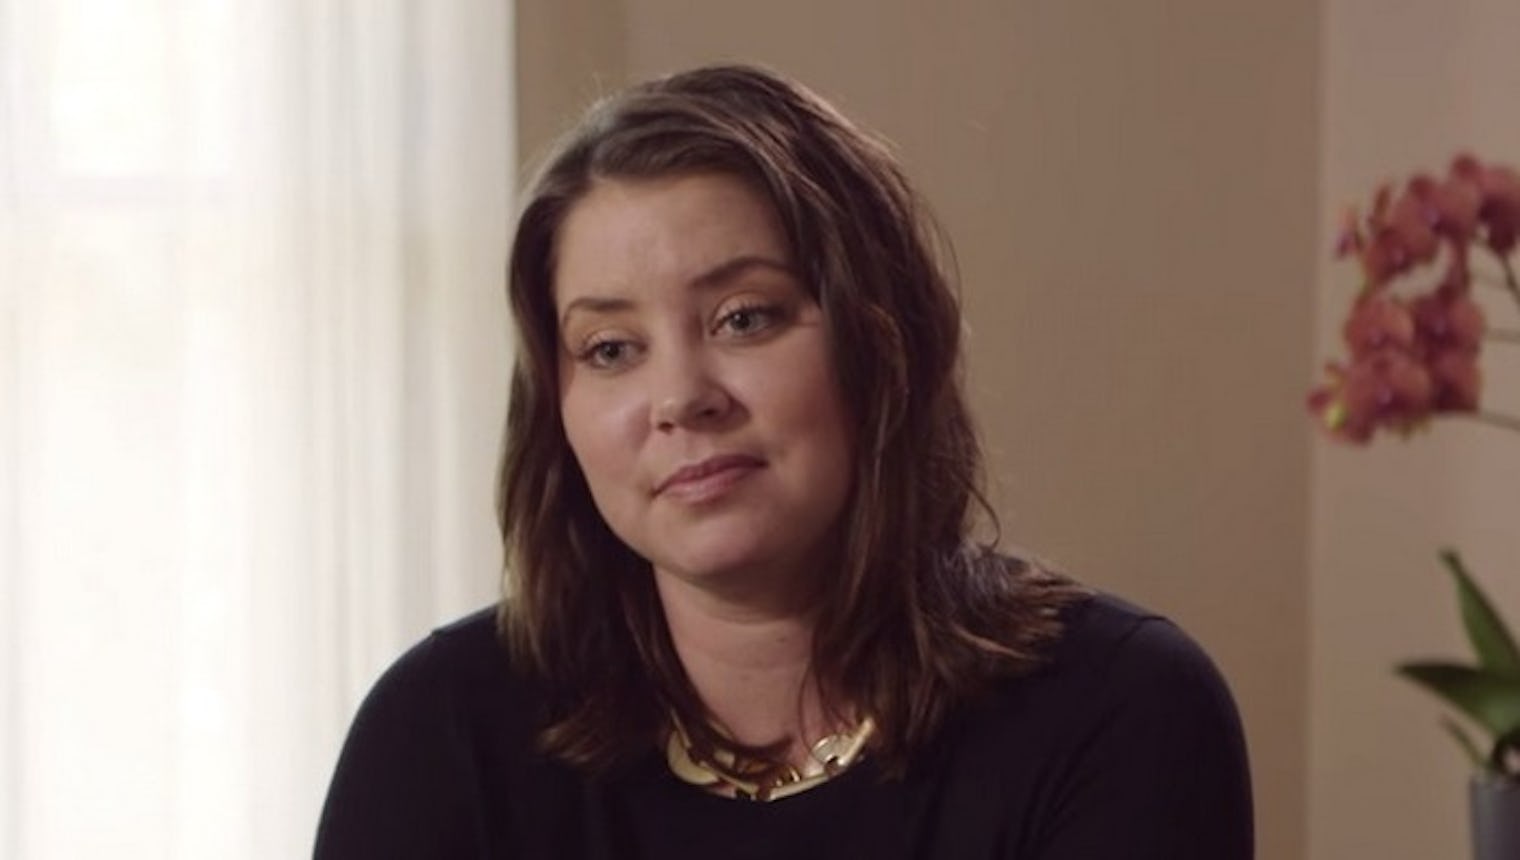 Death With Dignity Advocate Brittany Maynard Died And Here Are 9